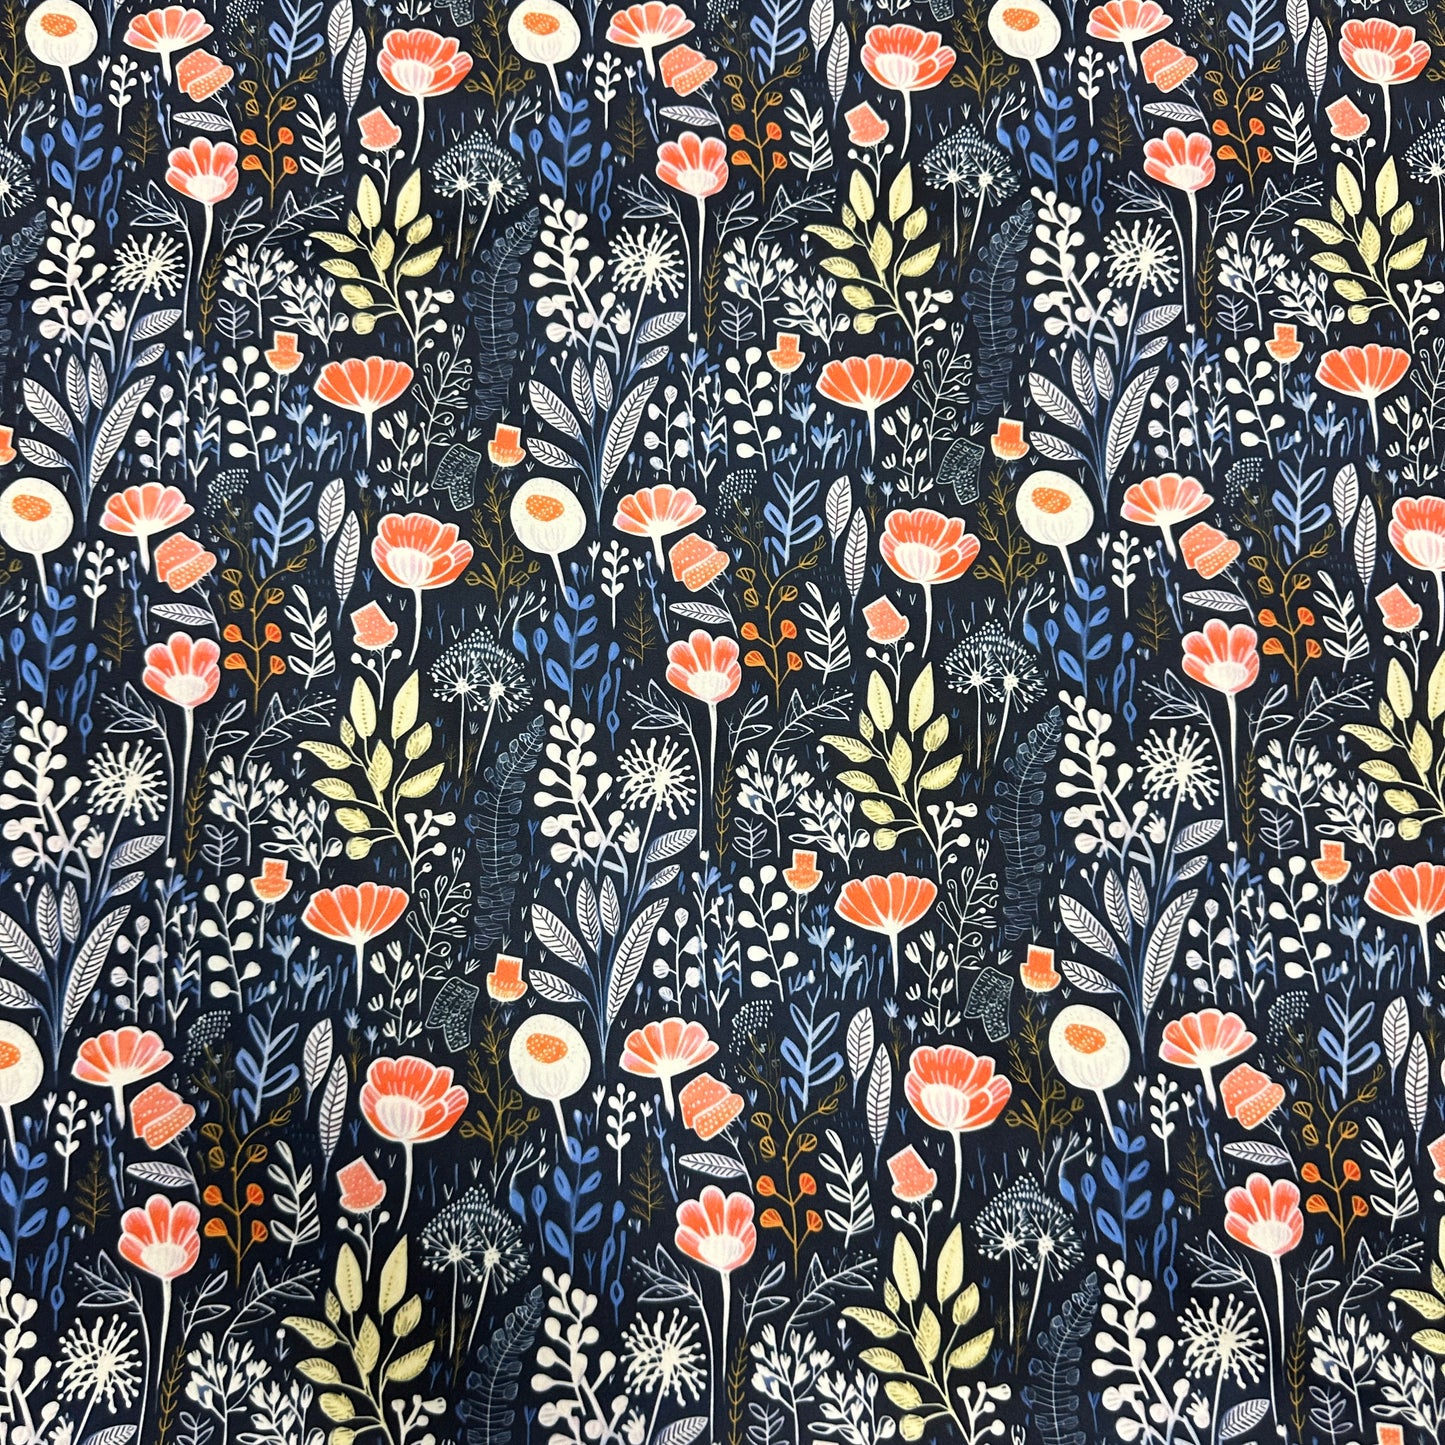 Coral and Navy Floral 1 mil PUL Fabric - Made in the USA